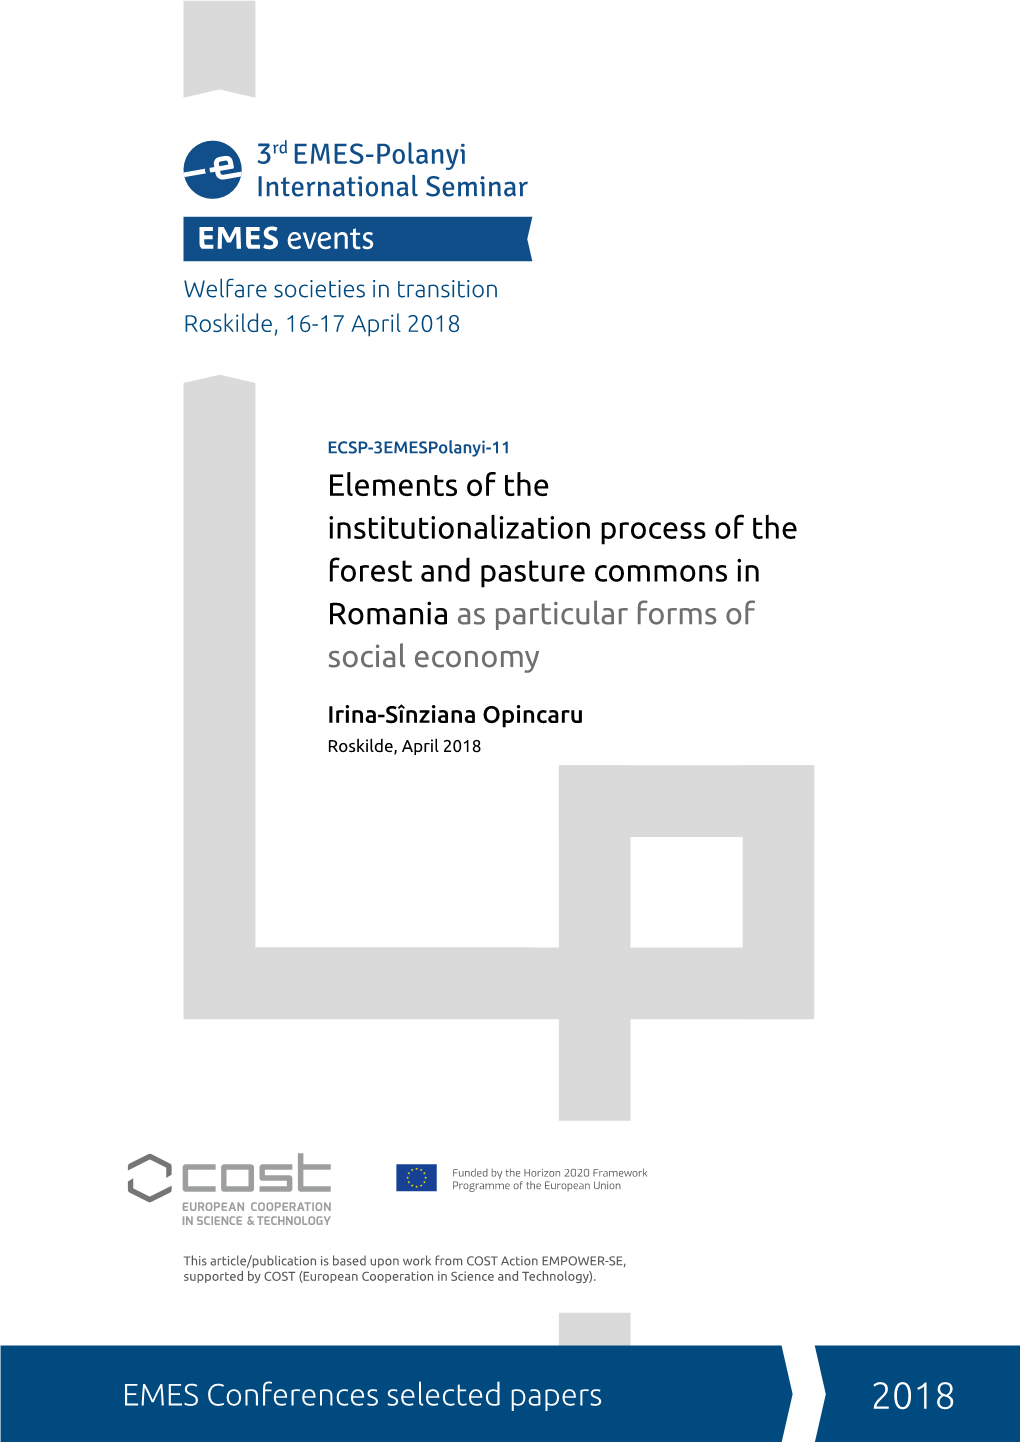 ECSP-3Emespolanyi-11 Elements of the Institutionalization Process of the Forest and Pasture Commons in Romania As Particular Forms of Social Economy